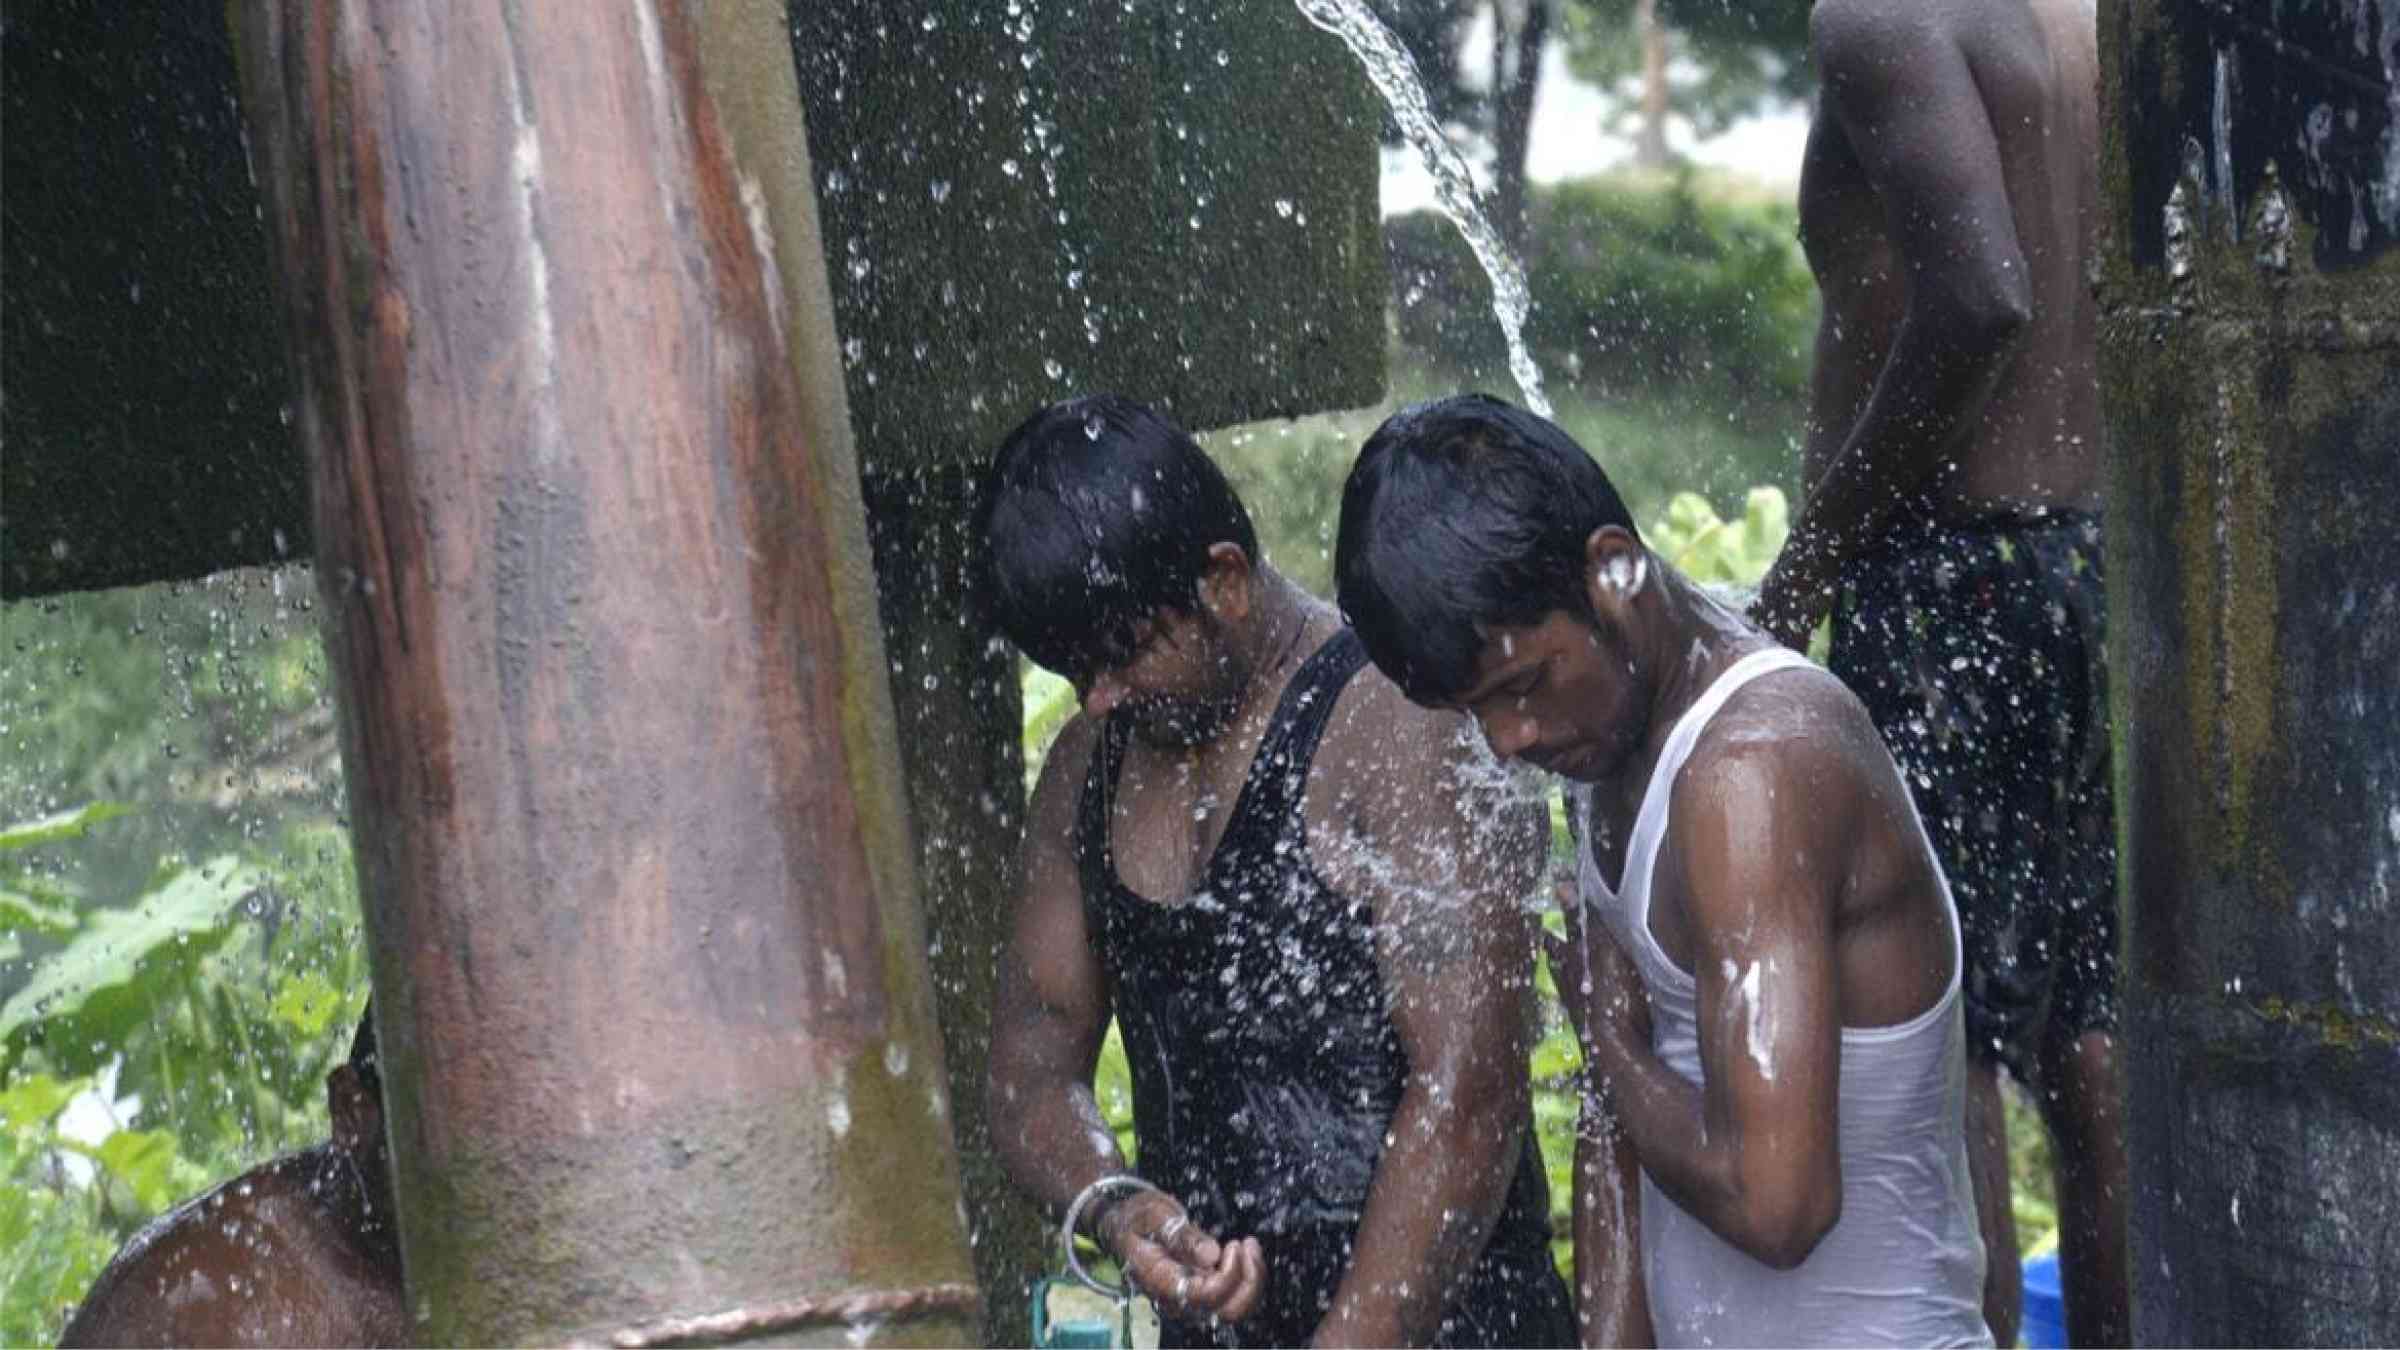 Cooling down during a heat wave, April 2017 in Calcutta, India.